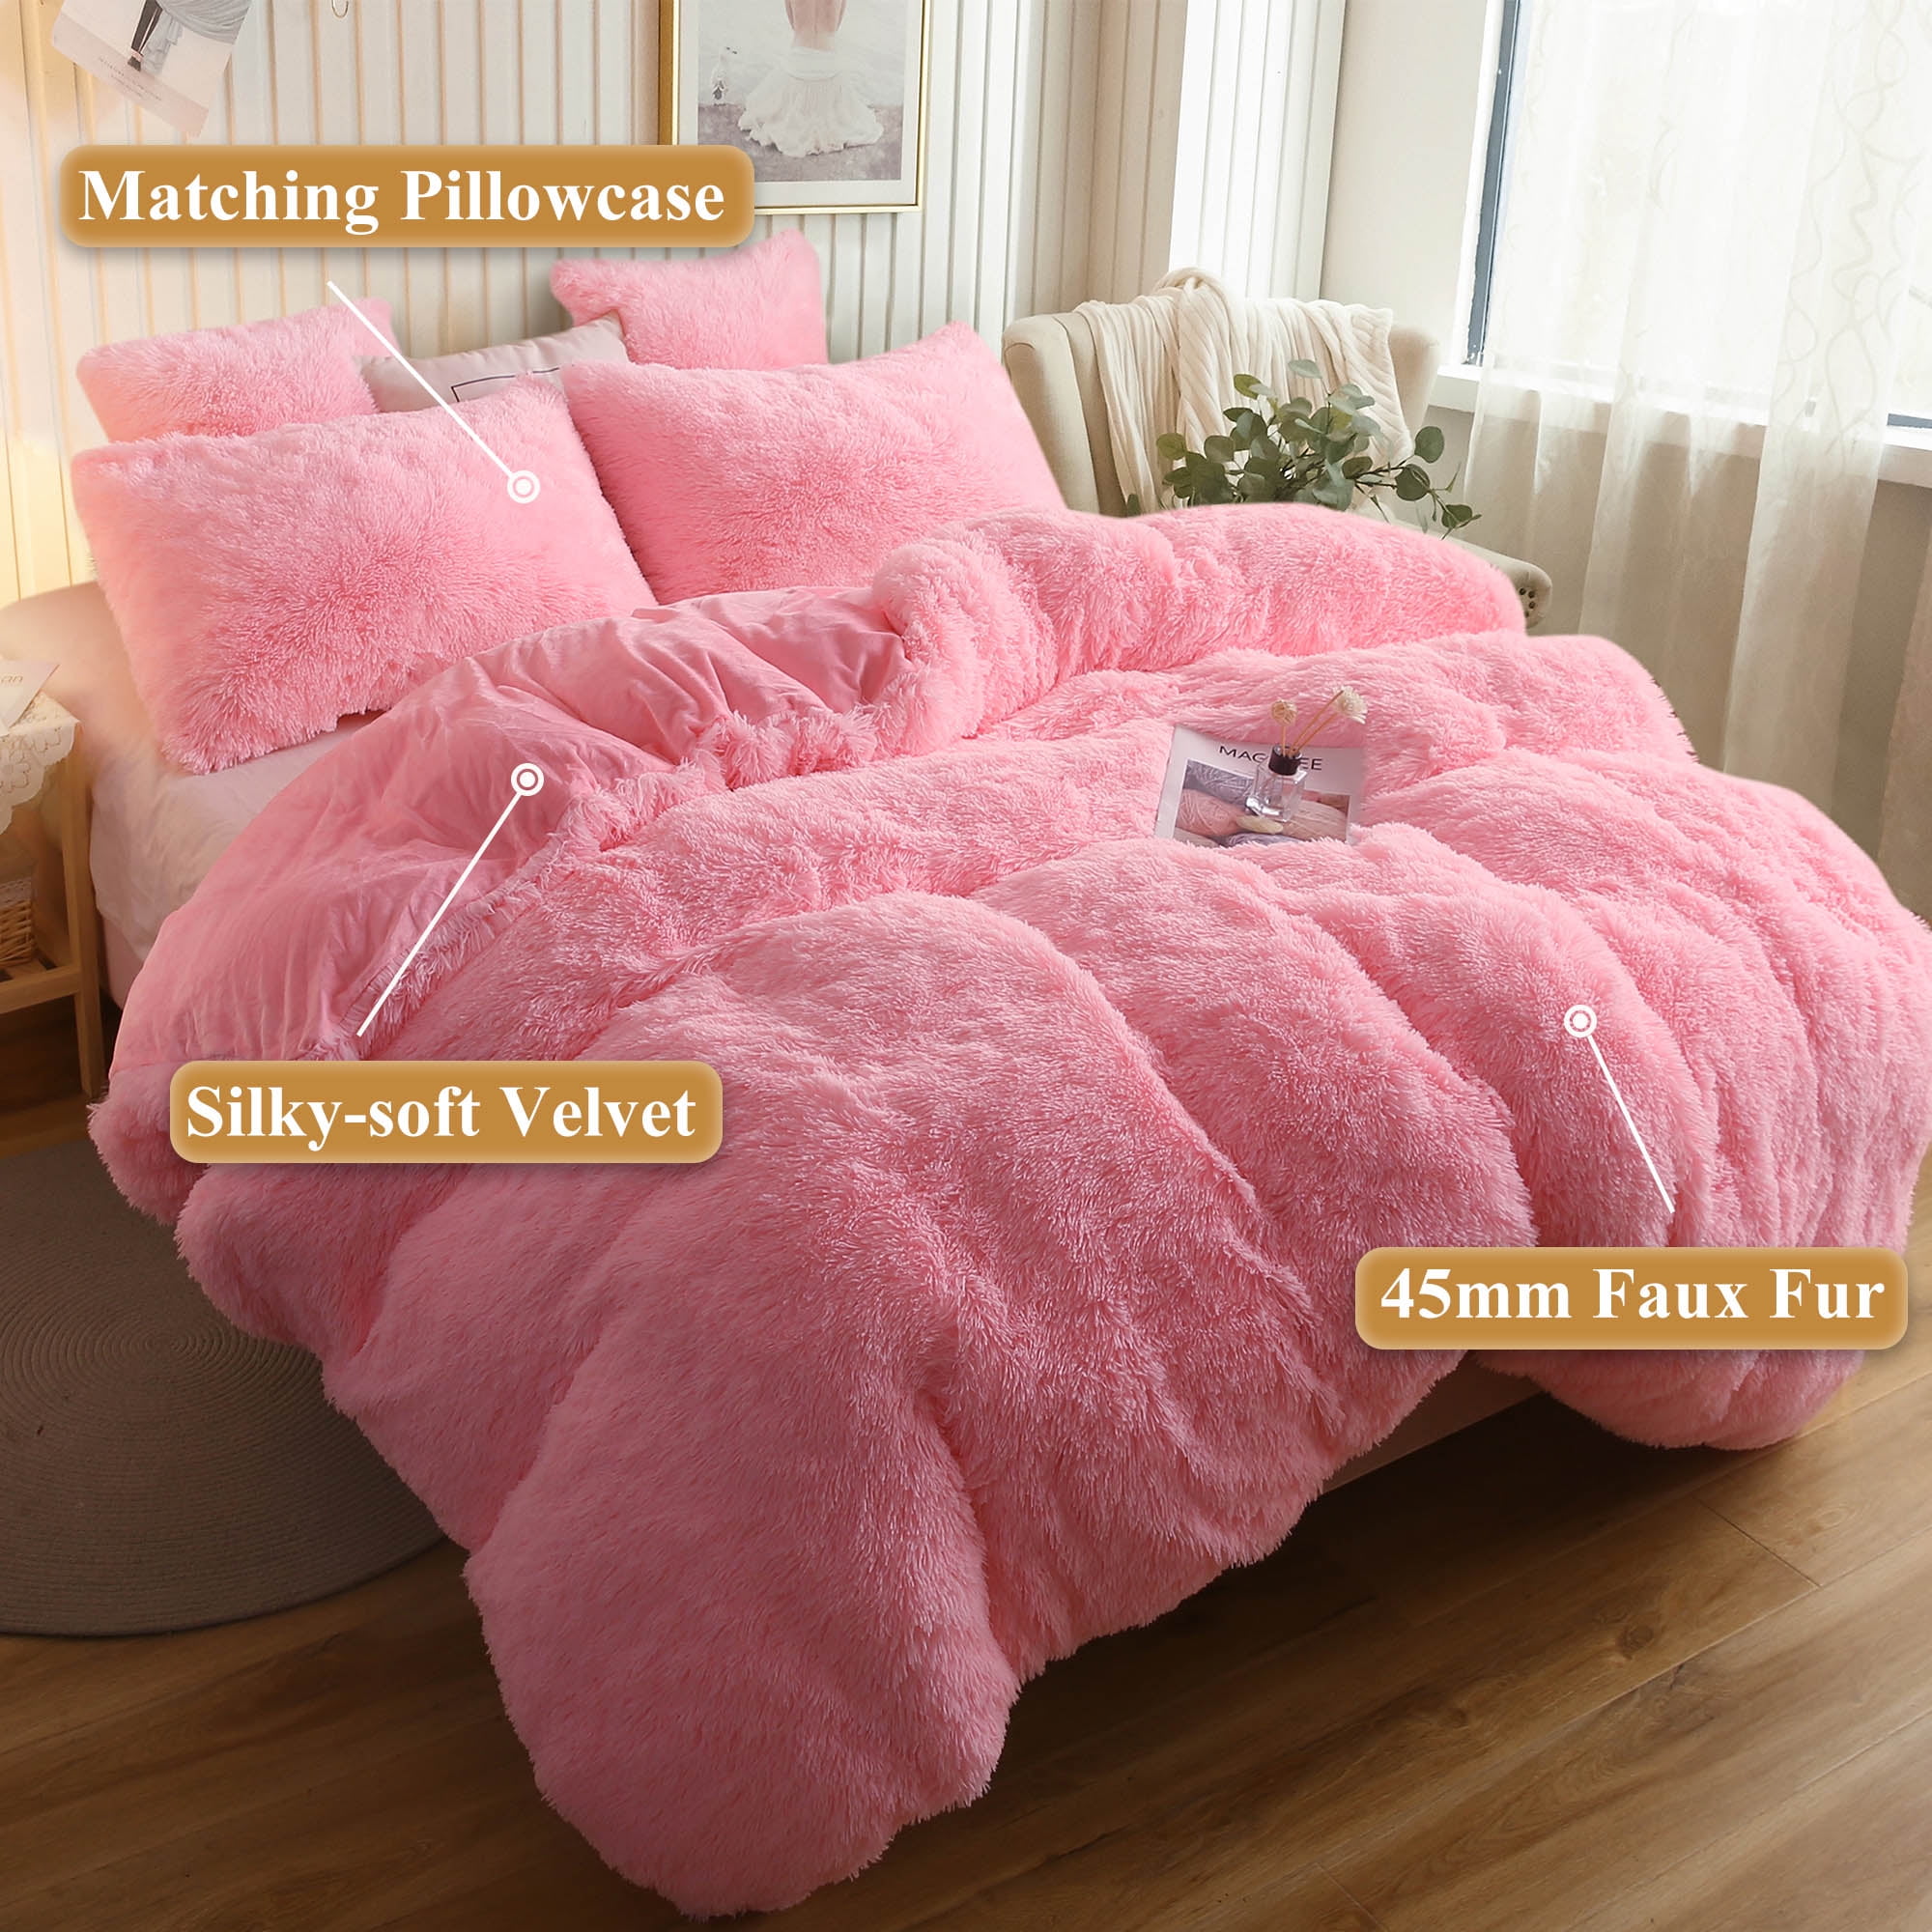 Bedding Sets Fluffy Comforter Cover Bed Set Out Faux Fur Fuzzy Duvet Luxury  Ultra Soft Plush Shaggy 221115 From Jia10, $26.41